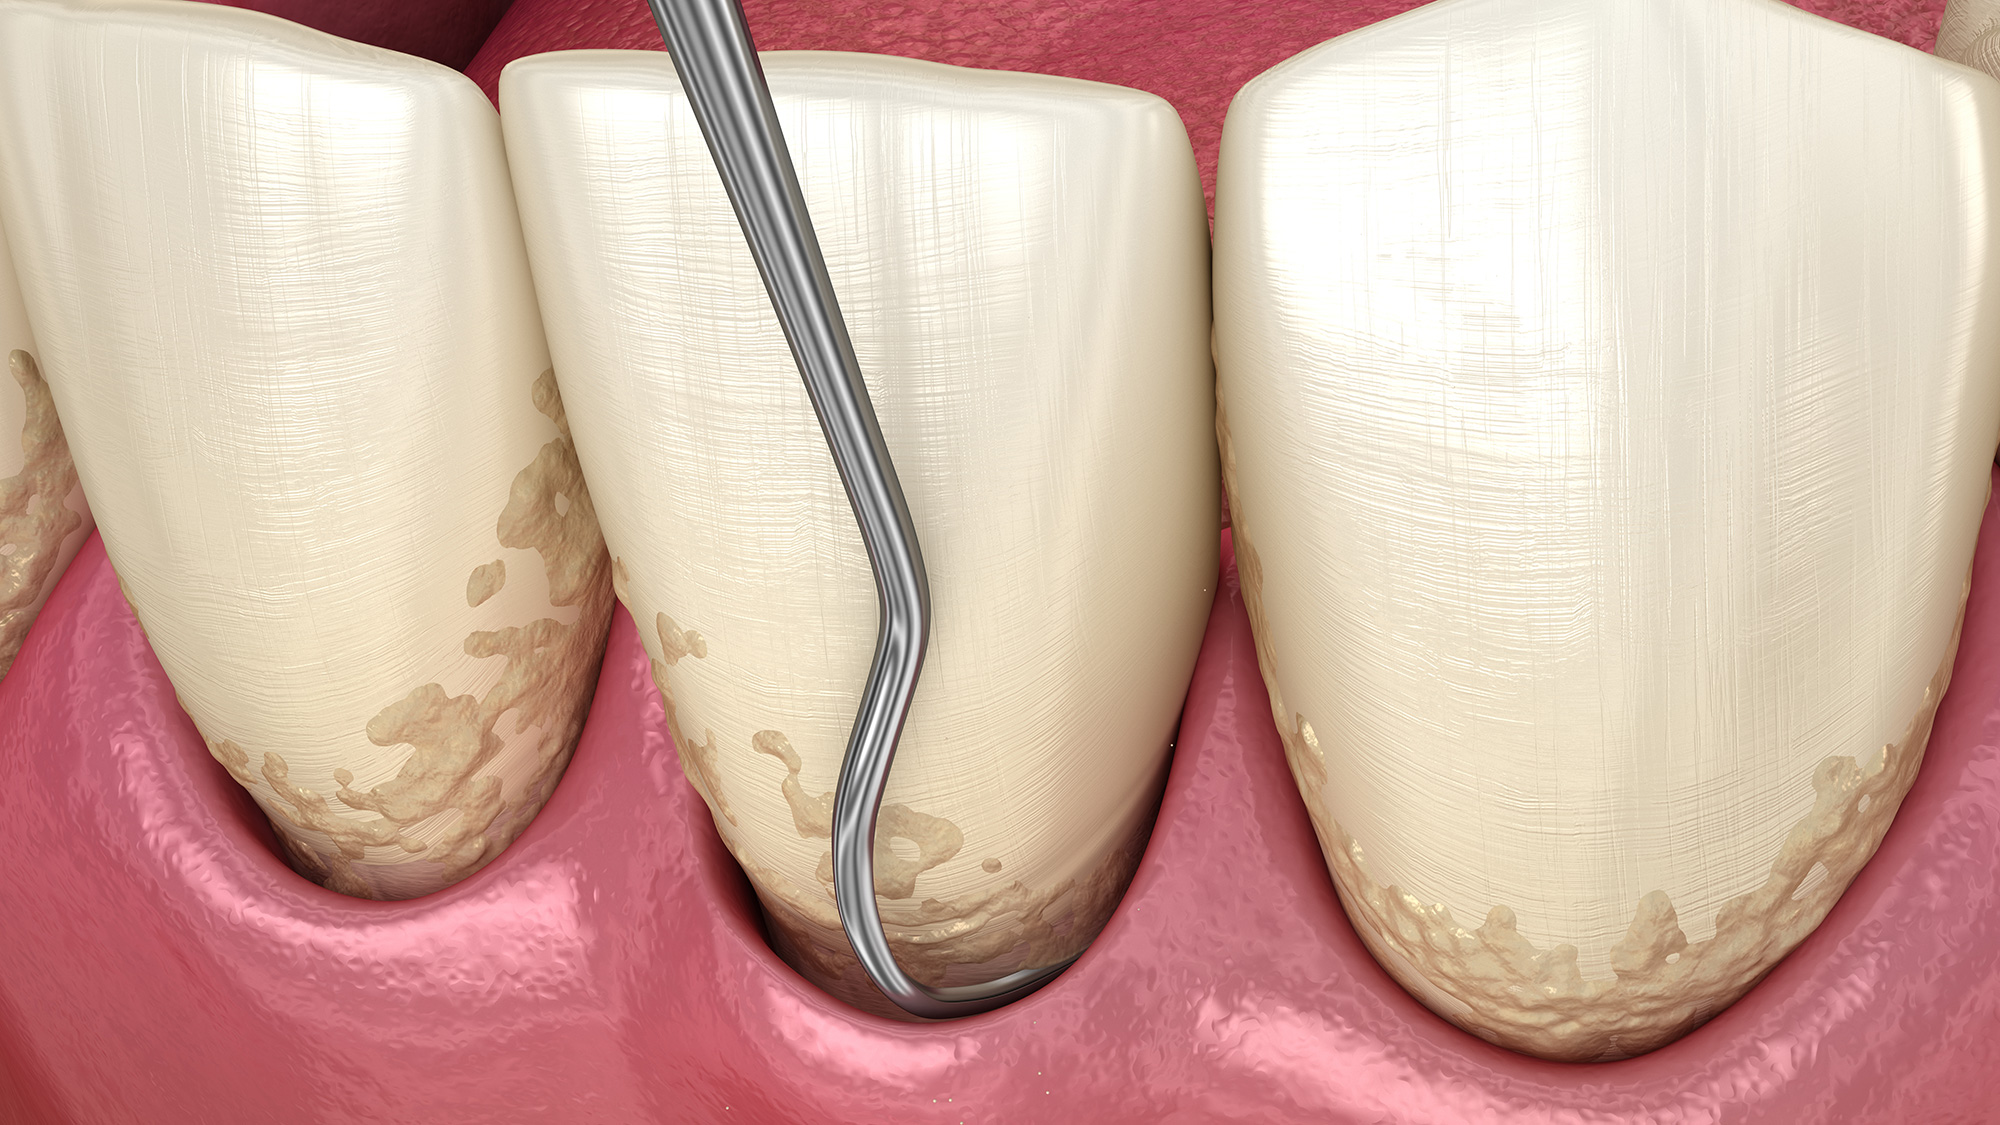 Scaling and Root Planing Pensacola Periodontics and Implant Dentistry Pensacola, FL